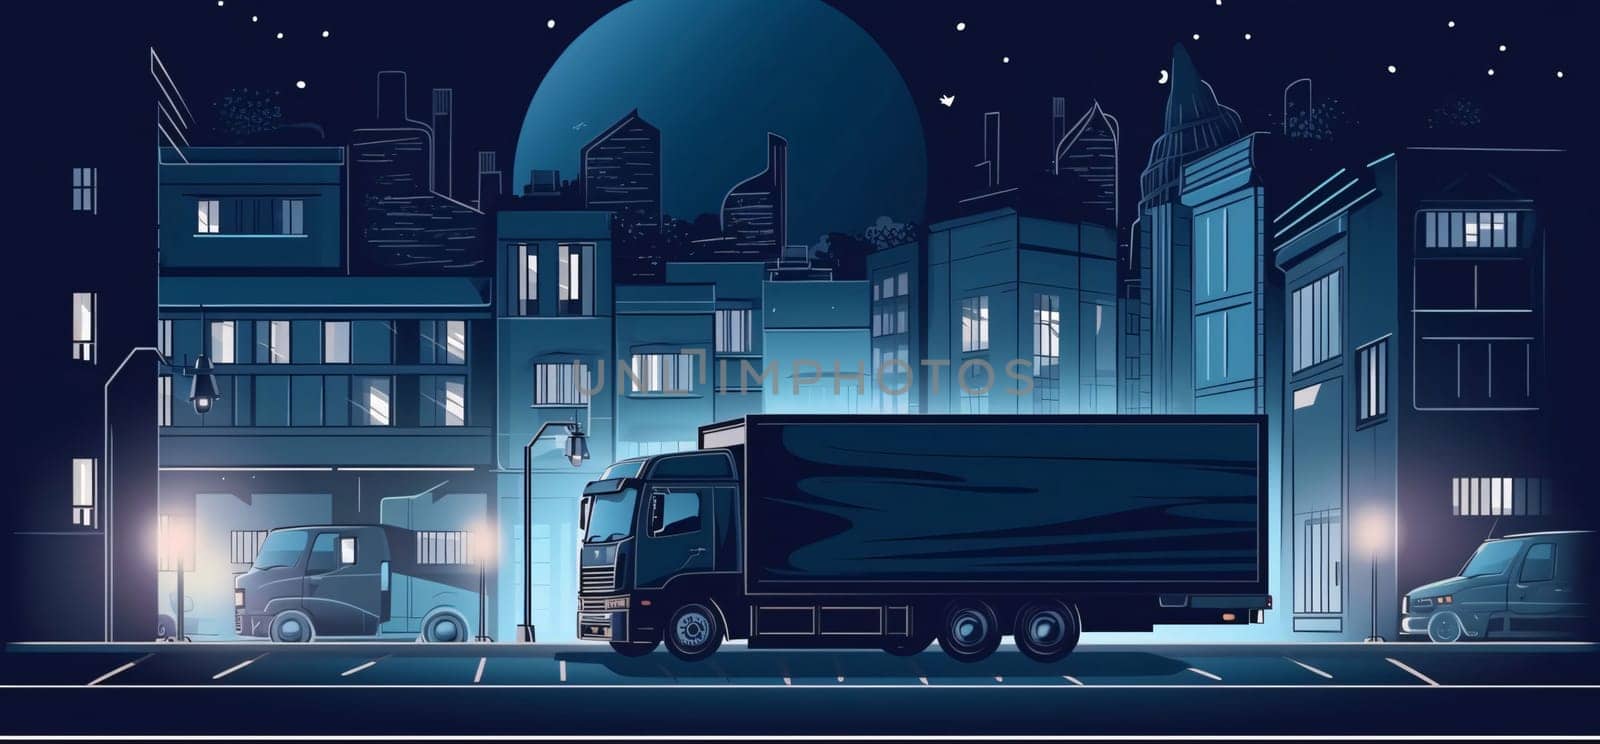 Truck on the road at night. Vector illustration of the city. by ThemesS